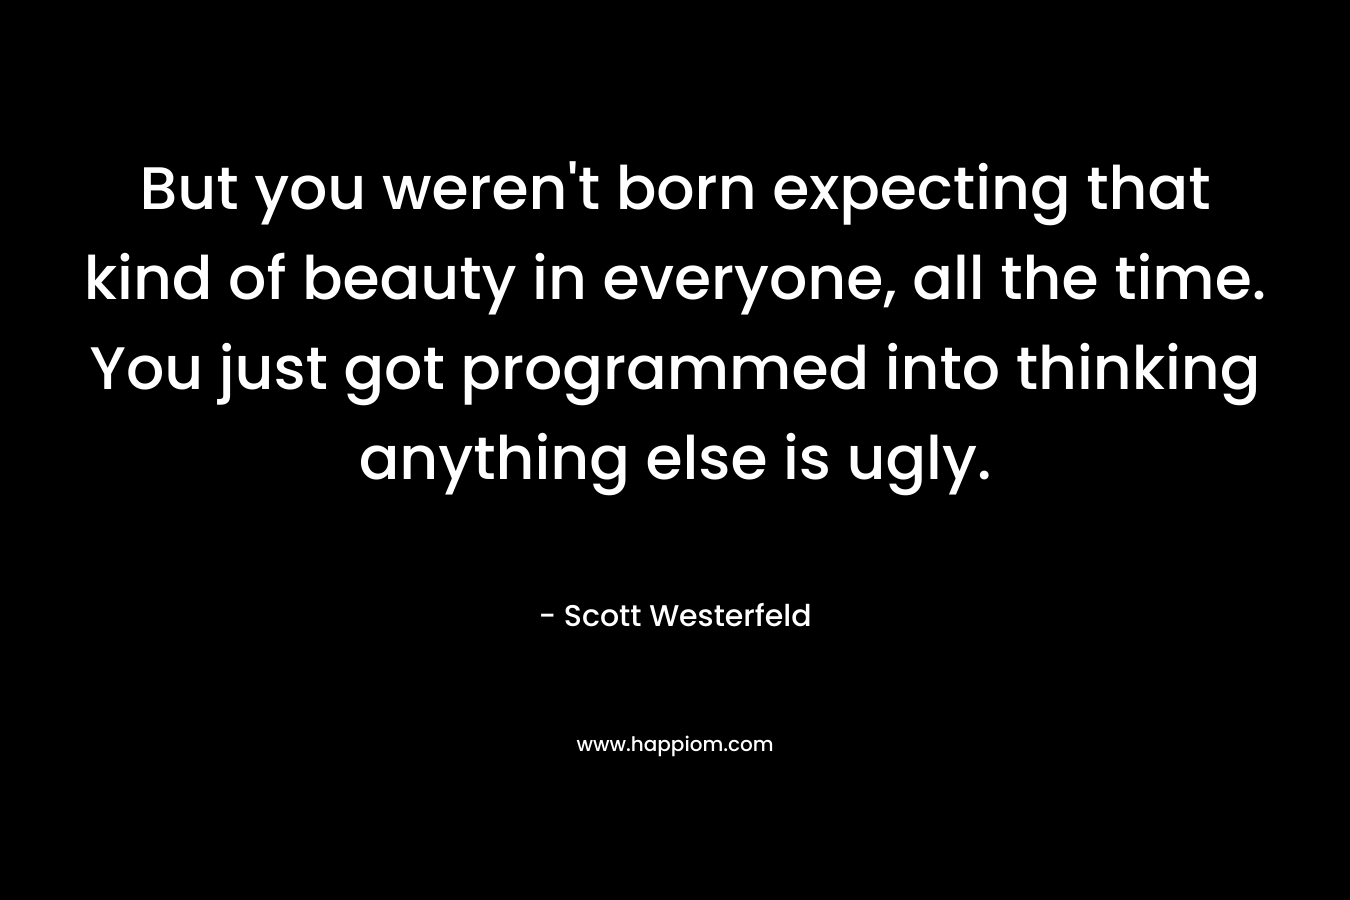 But you weren't born expecting that kind of beauty in everyone, all the time. You just got programmed into thinking anything else is ugly.